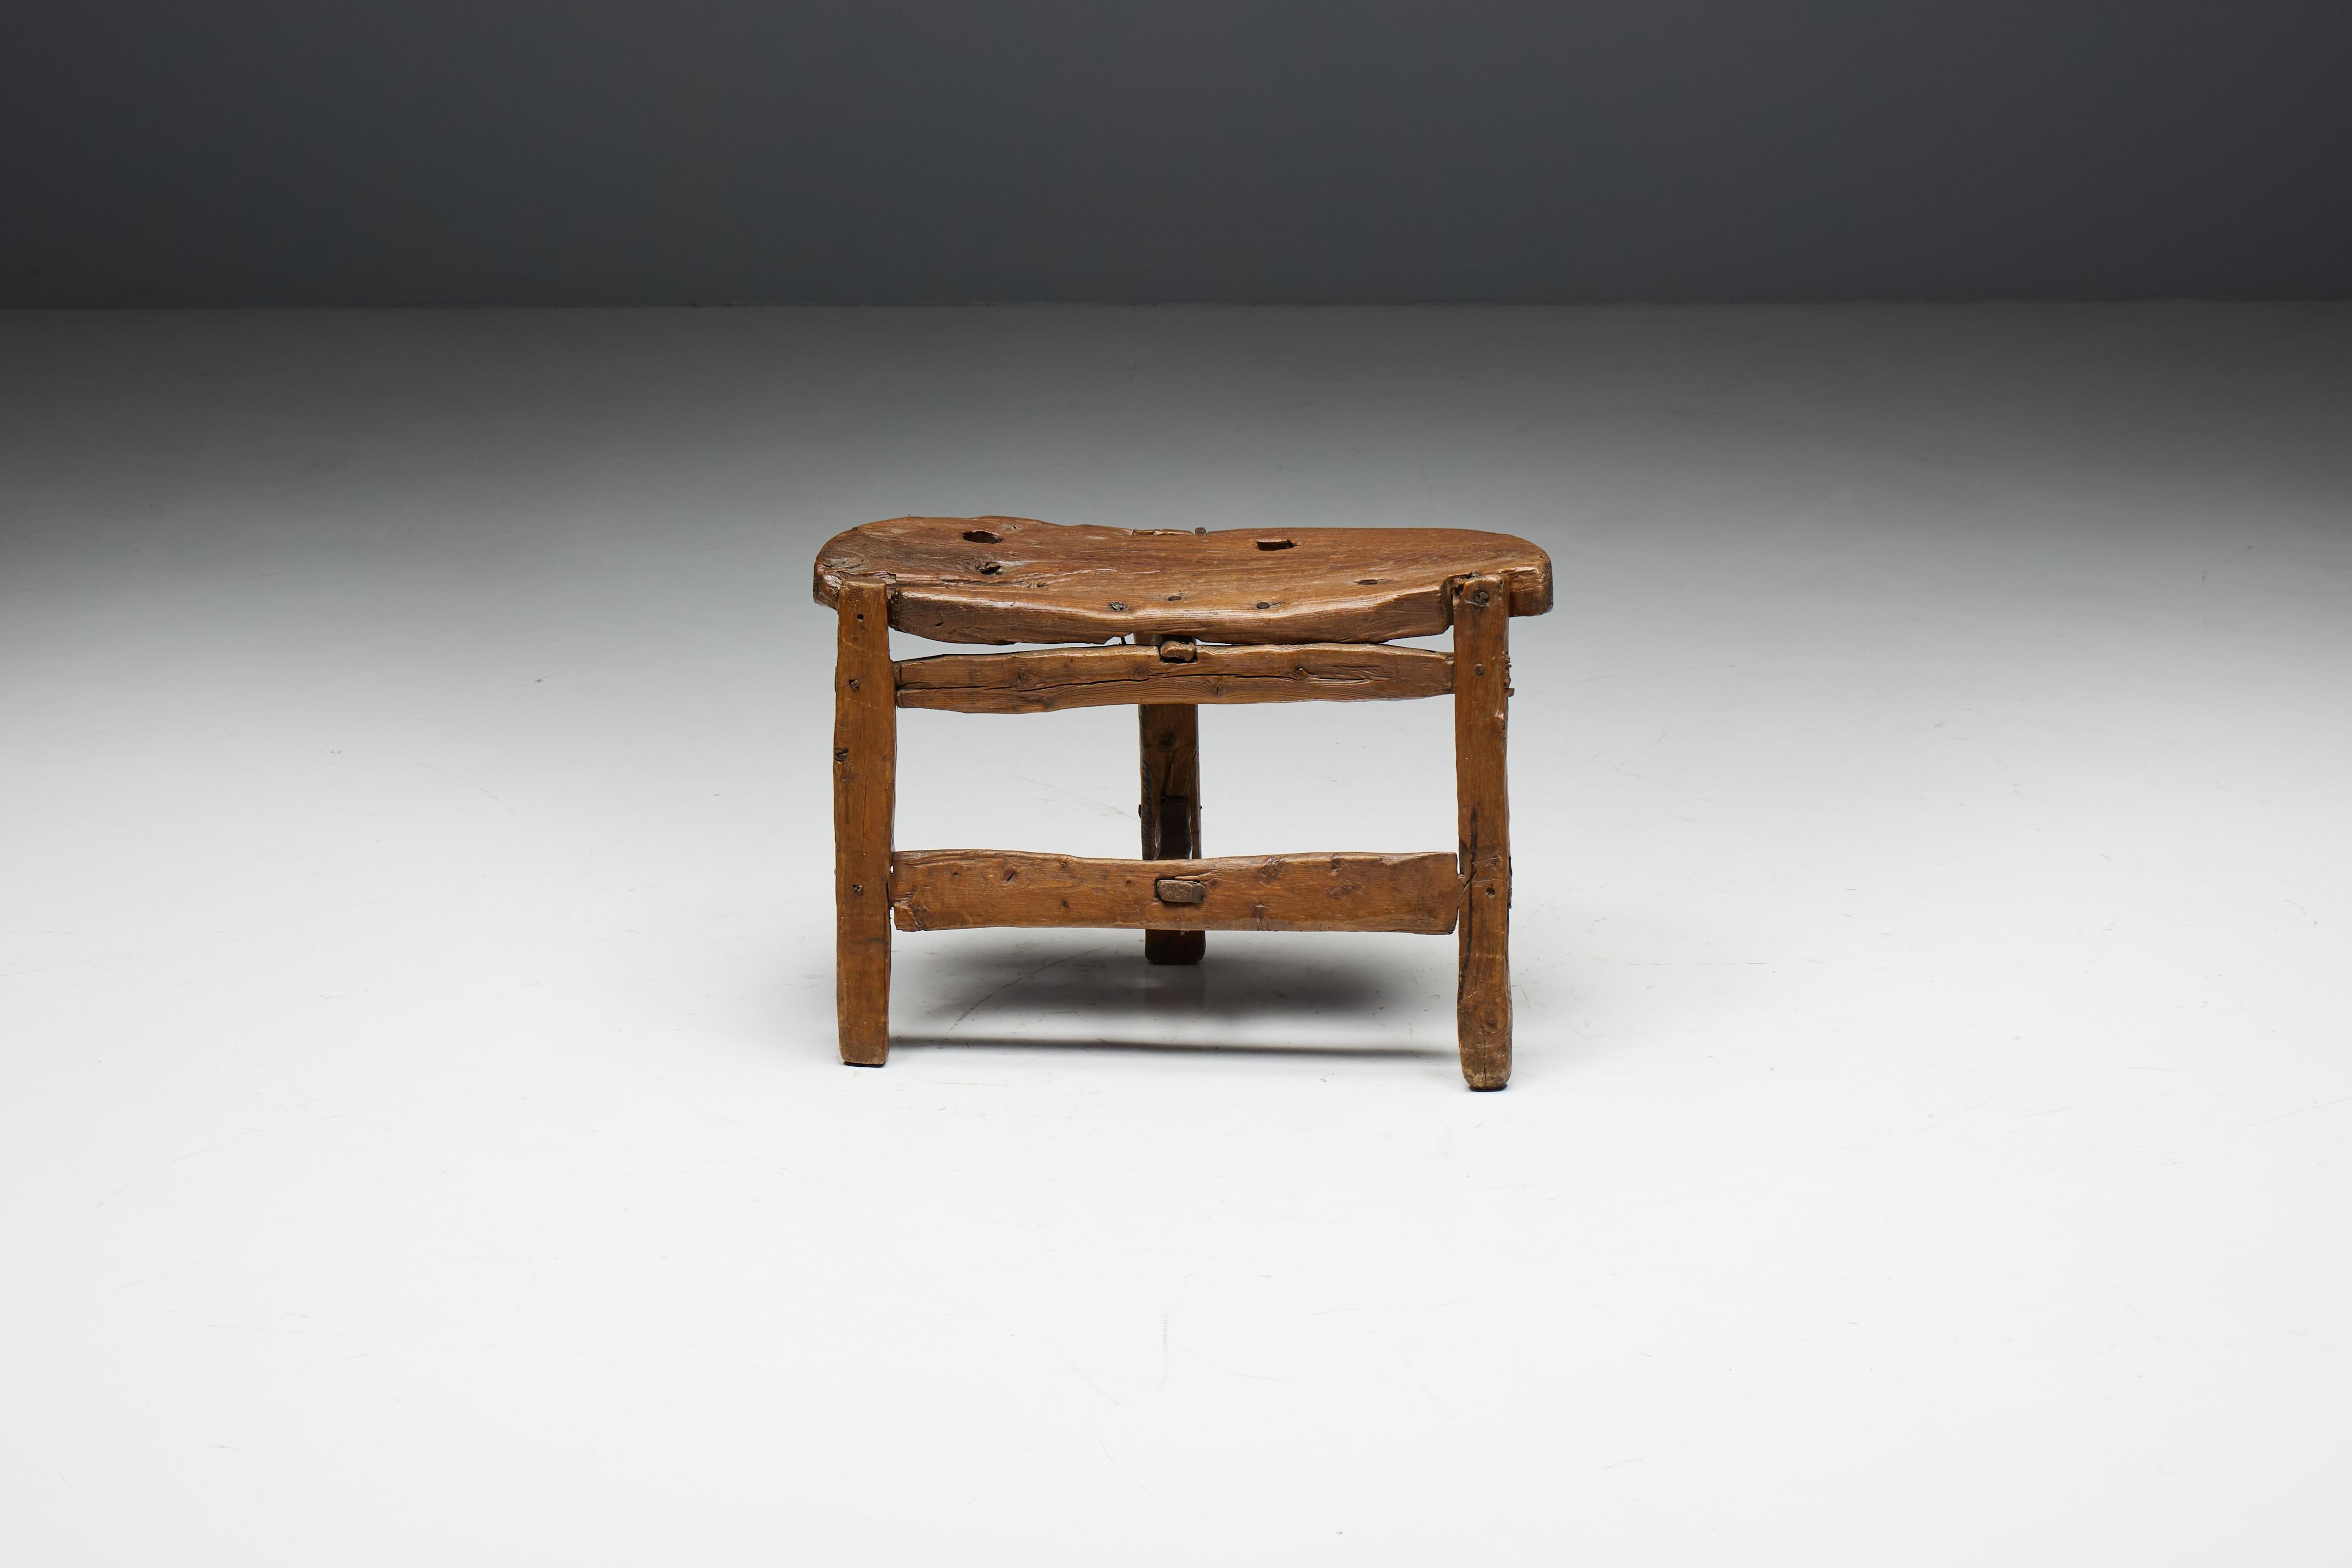 Organic tripod folk art bench that beautifully captures the essence of the wabi-sabi philosophy, a Japanese tradition that appreciates the beauty of natural imperfection and the grace of aging. Its remarkable patina and sculptural design highlight